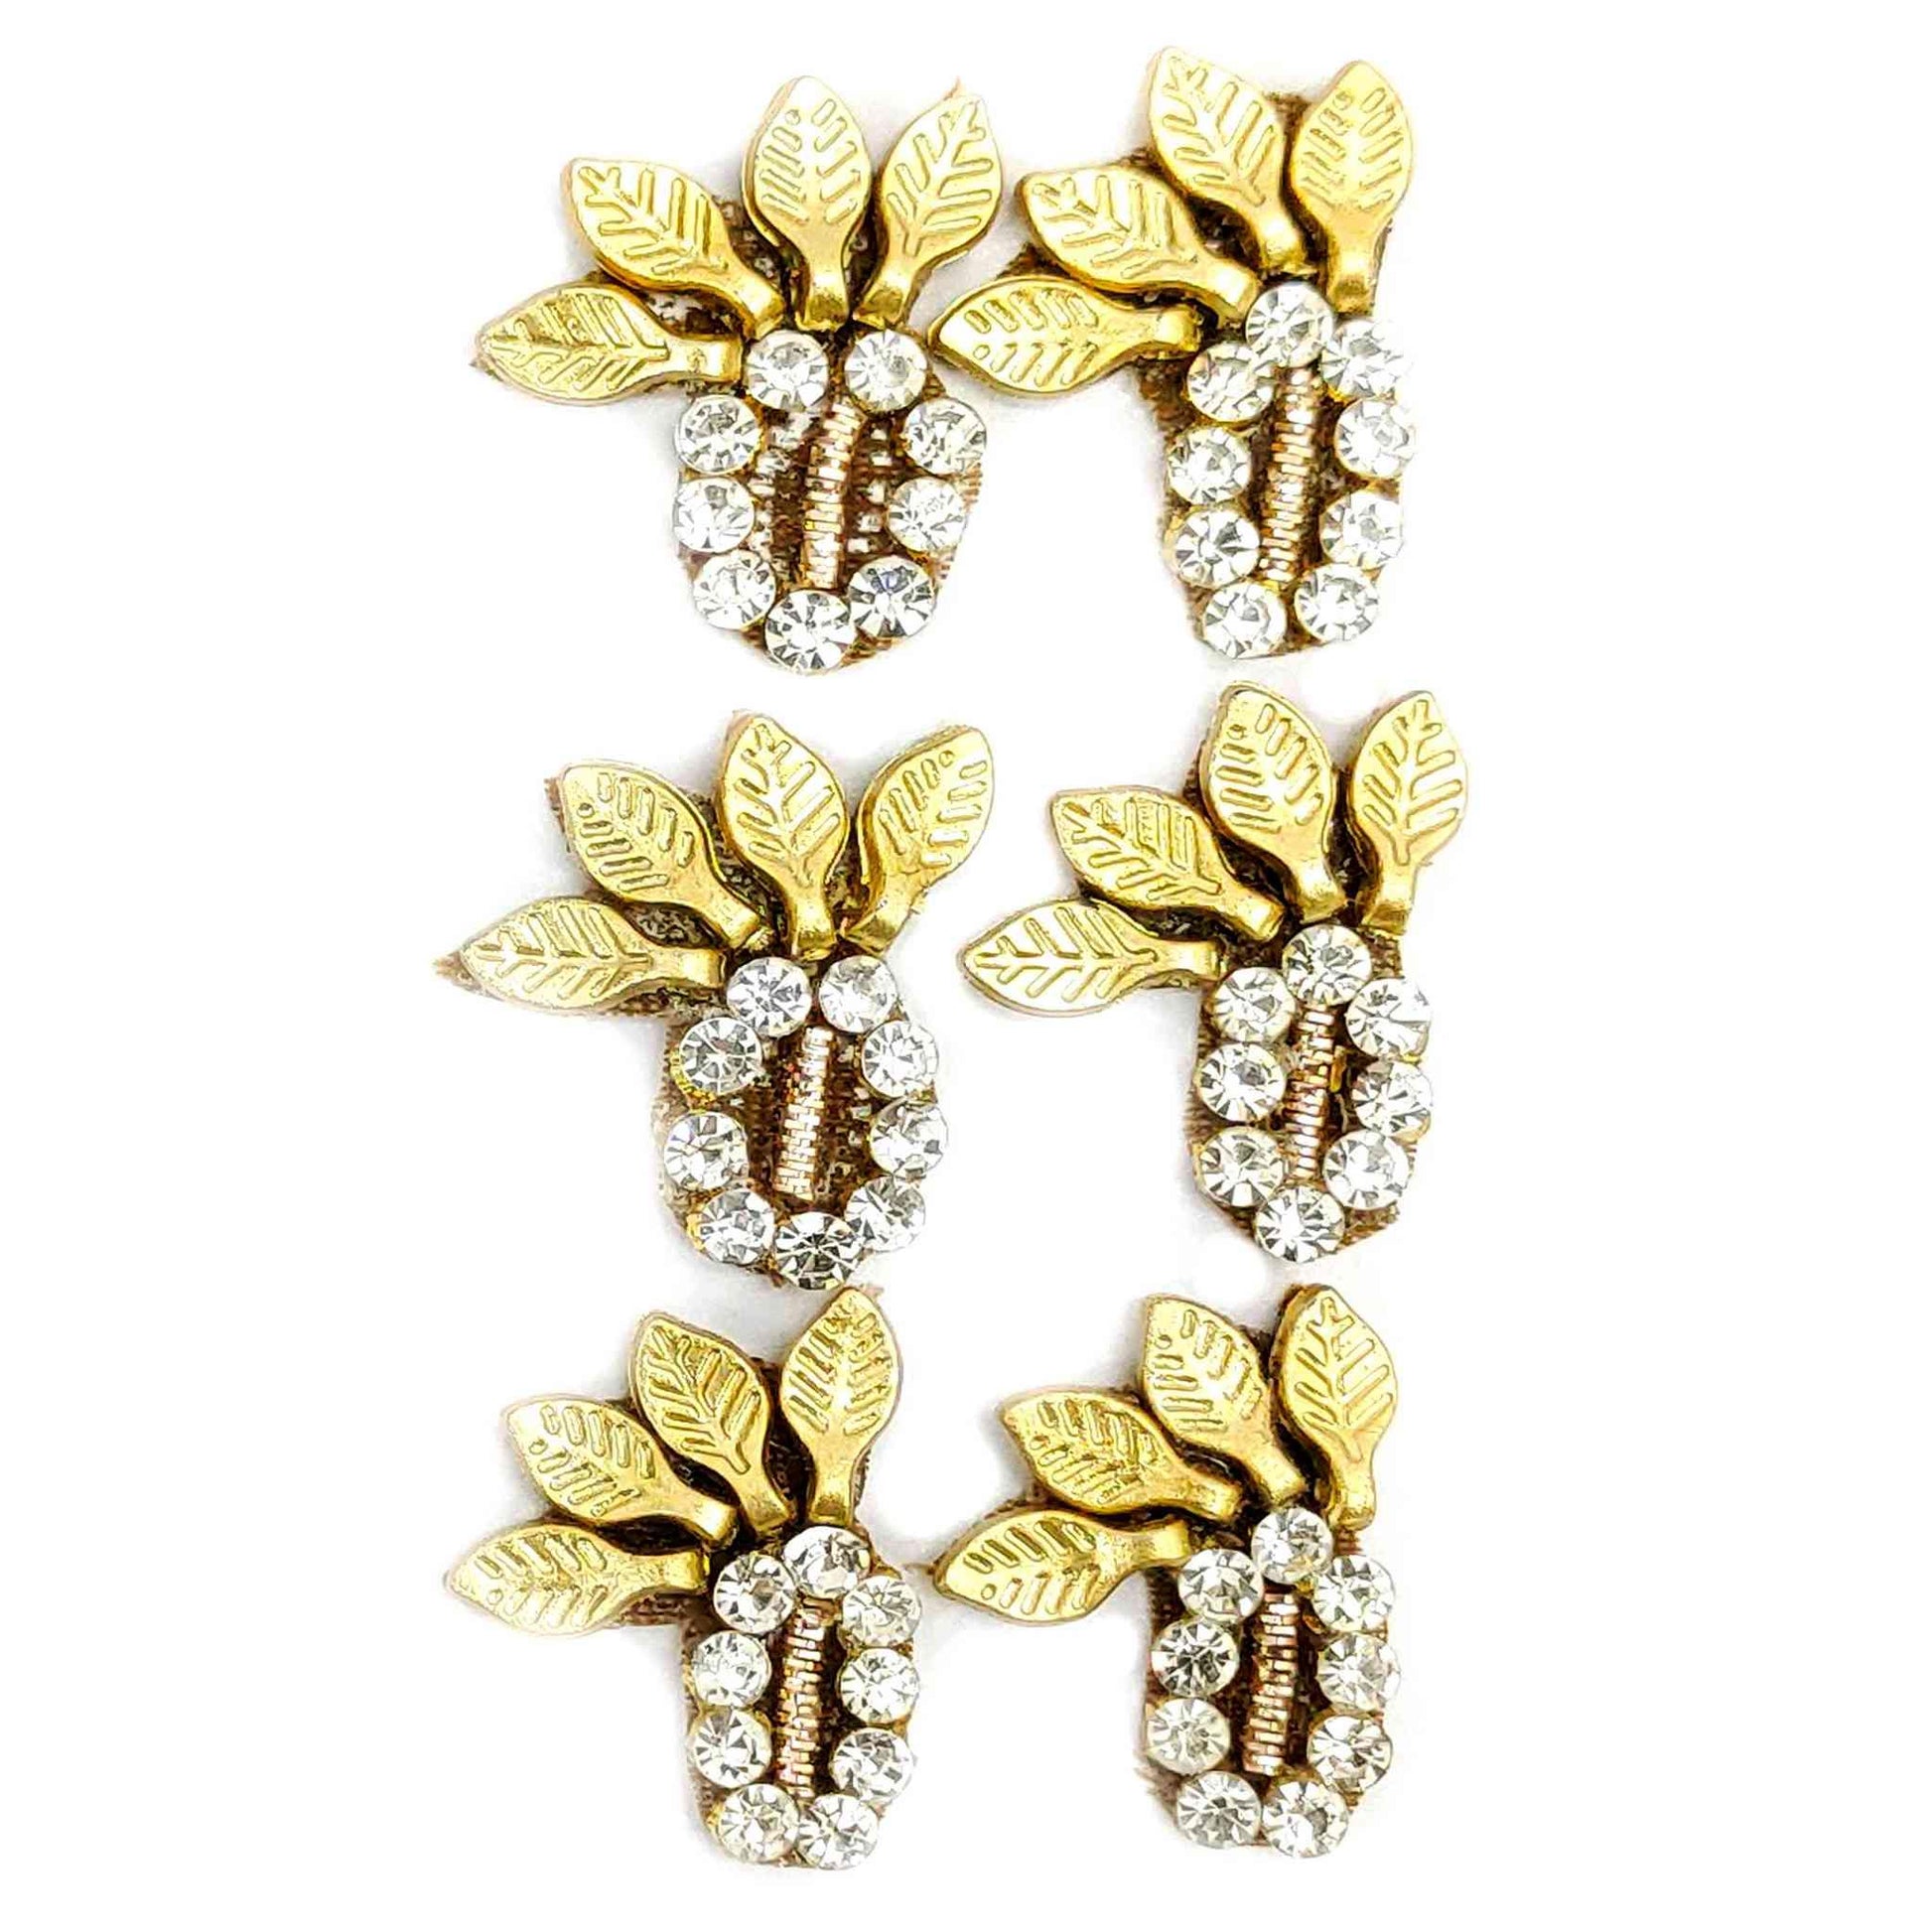 Studded Leaf Buti for DIY Craft, Trousseau Packing or Decoration (Bunch of 12) - Design 241 - Indian Petals